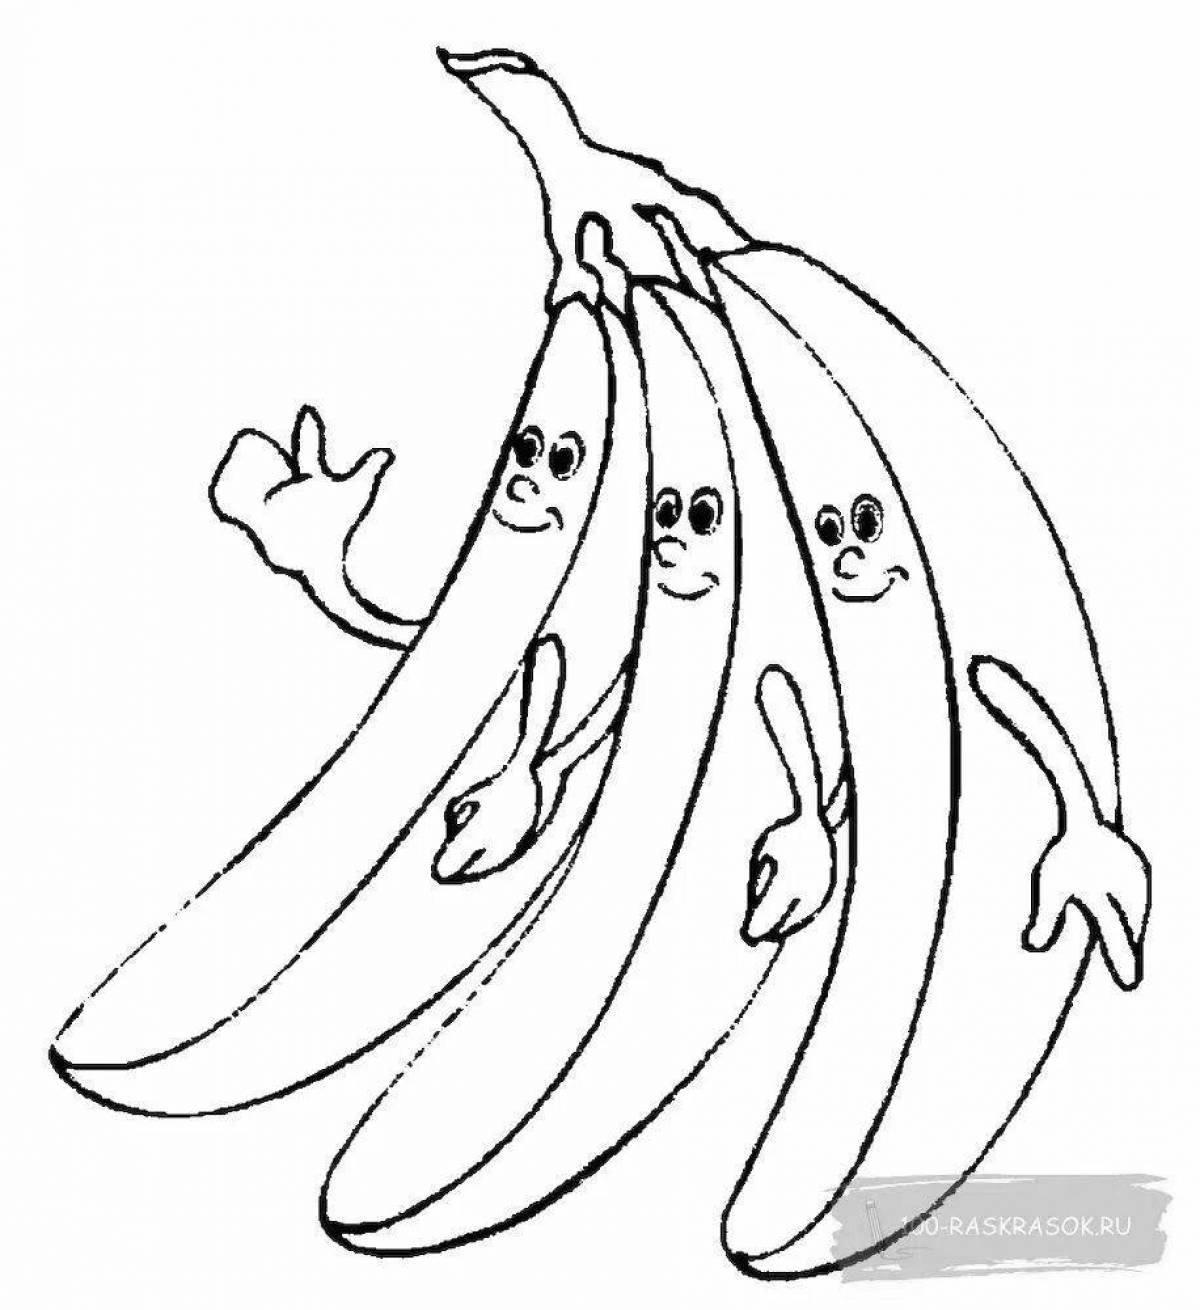 Colored banana coloring book for 2-3 year olds